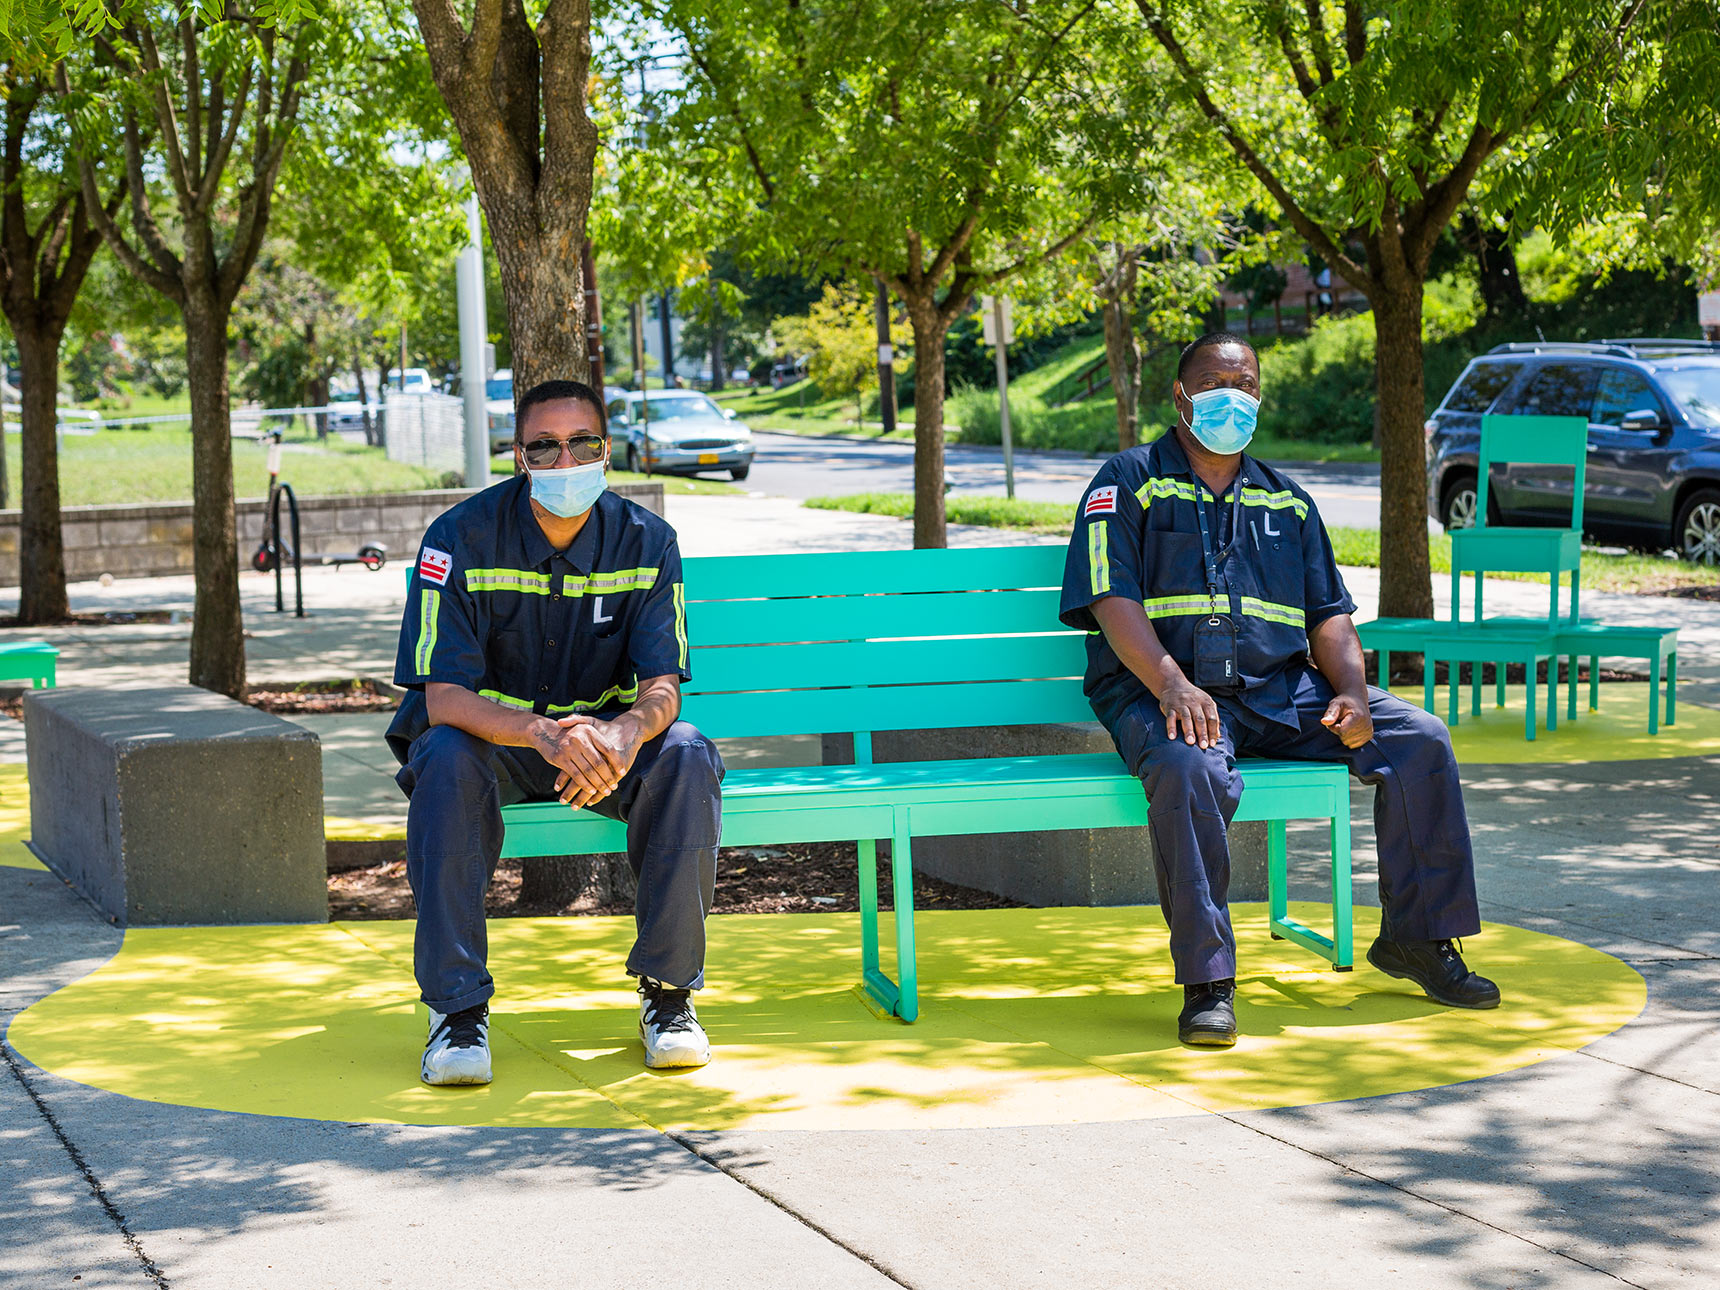 Two men on Seesaw Bench, part of The Chairs, a sculptural seating public art installation in Washington DC.